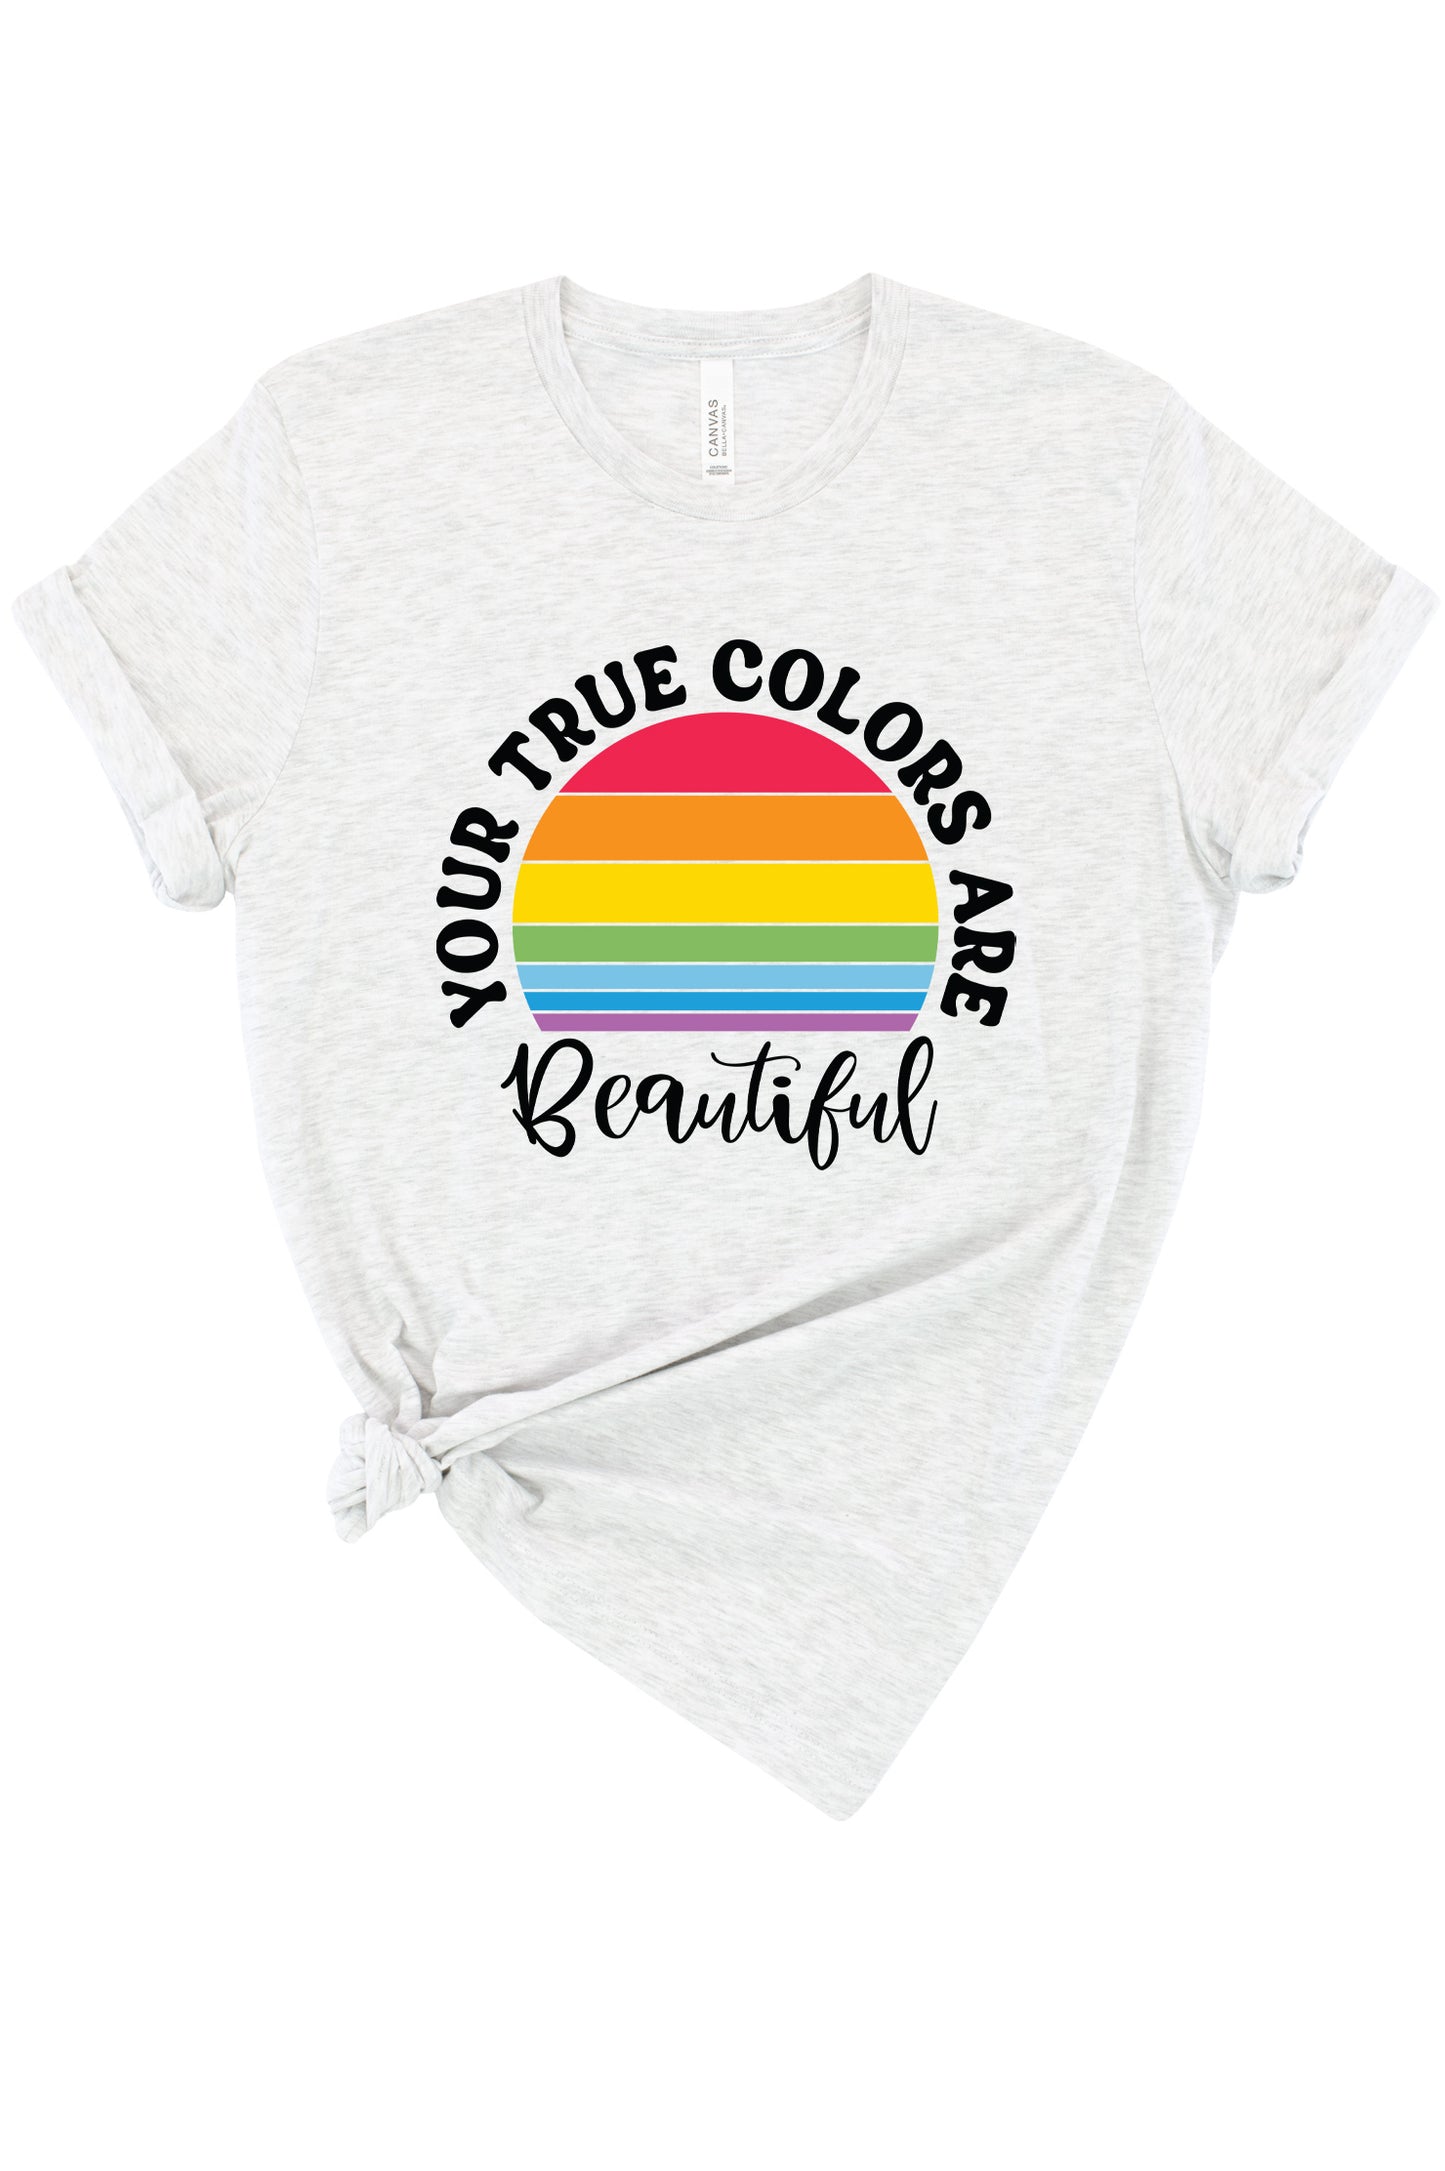 Your True Colors Graphic Tee